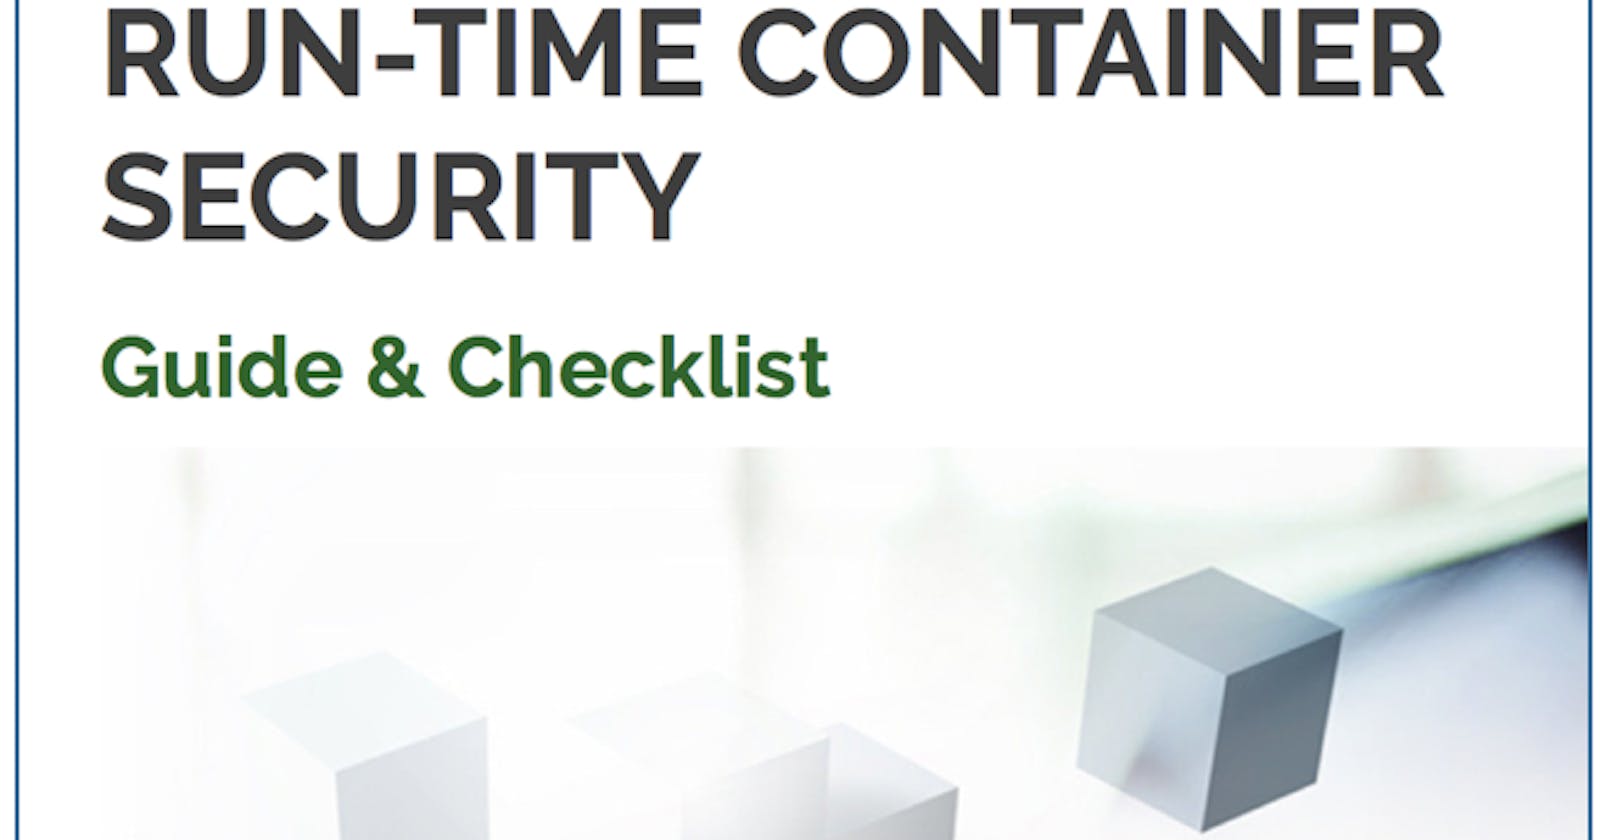 15 Tips for a Run-time Container Security Strategy